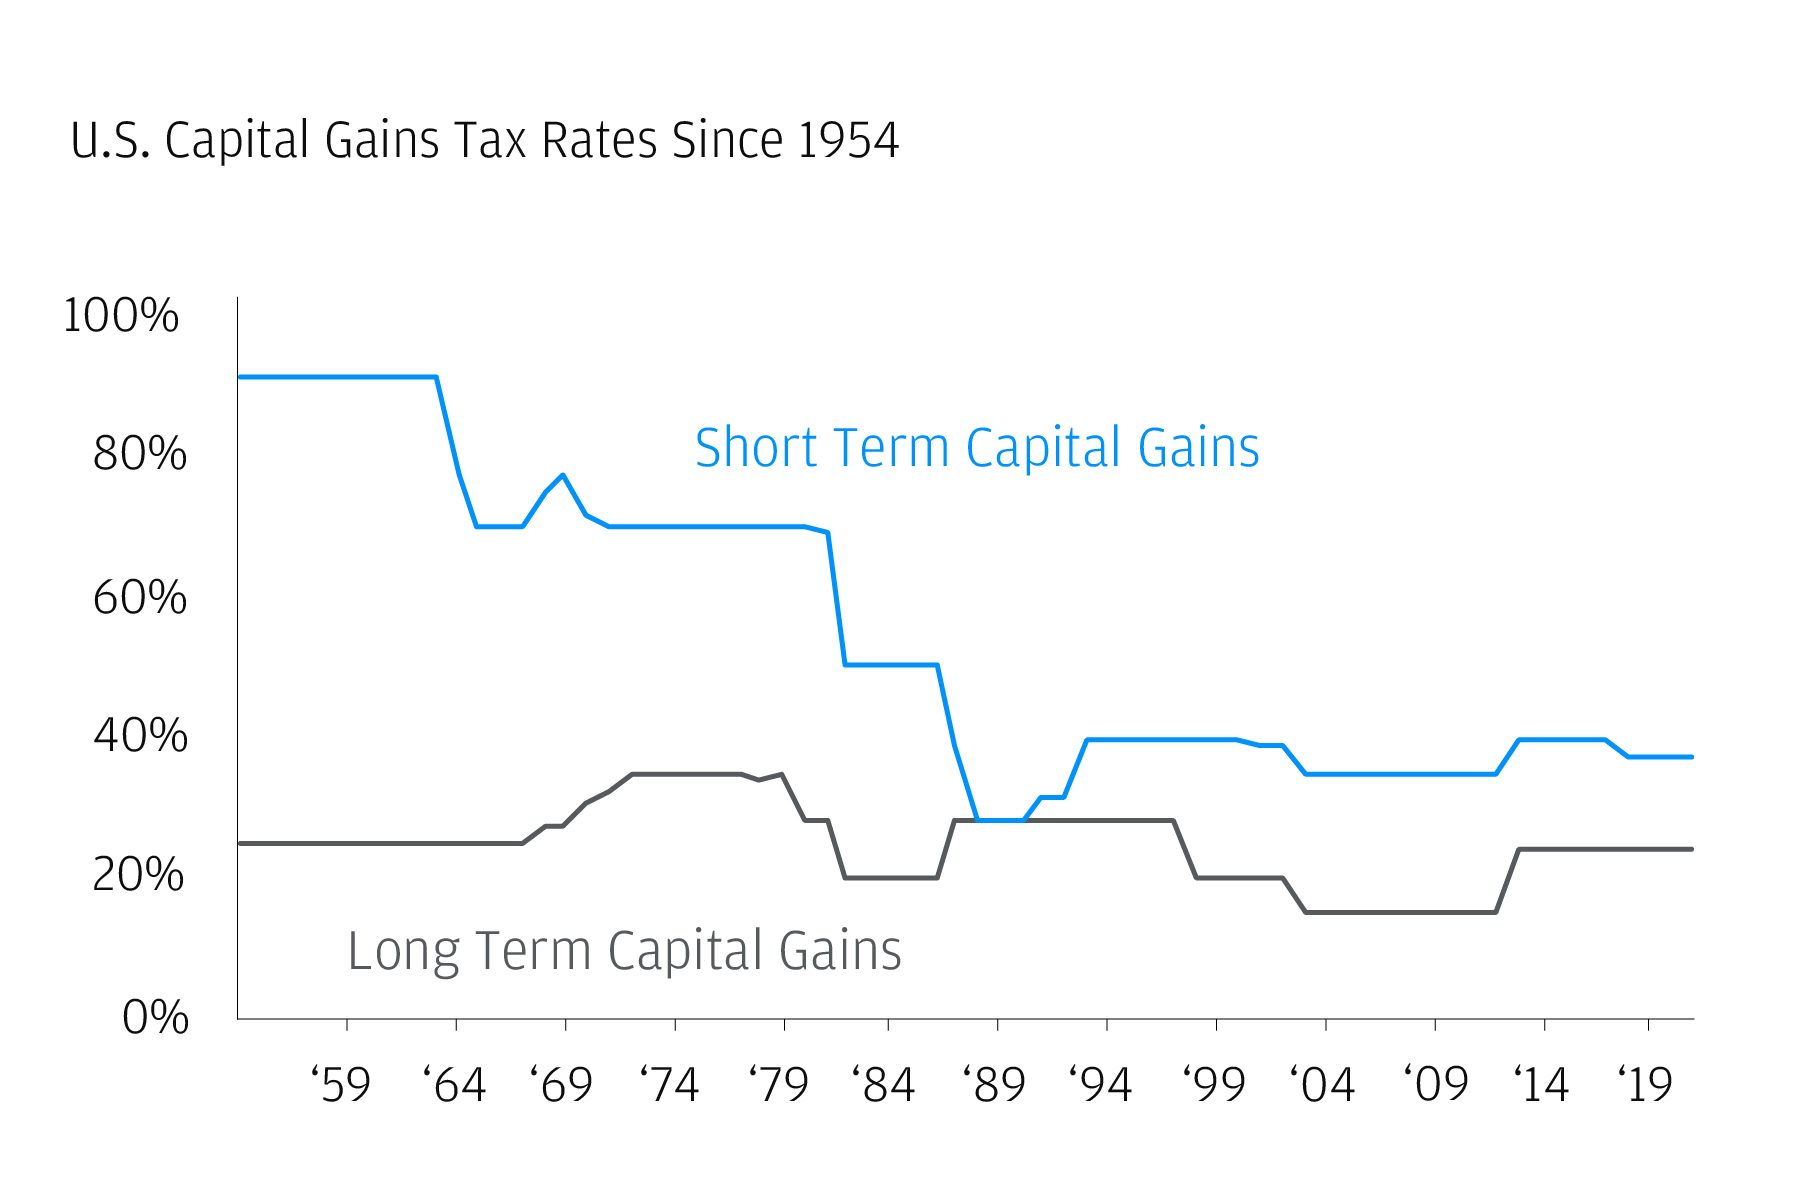  Line graph displaying short term and long term capital gains taxes from 1954 to 2021. Ove time, short term capital gains taxes have decreased to multi-decade lows while long term capital gains have remained relatively range-bound.